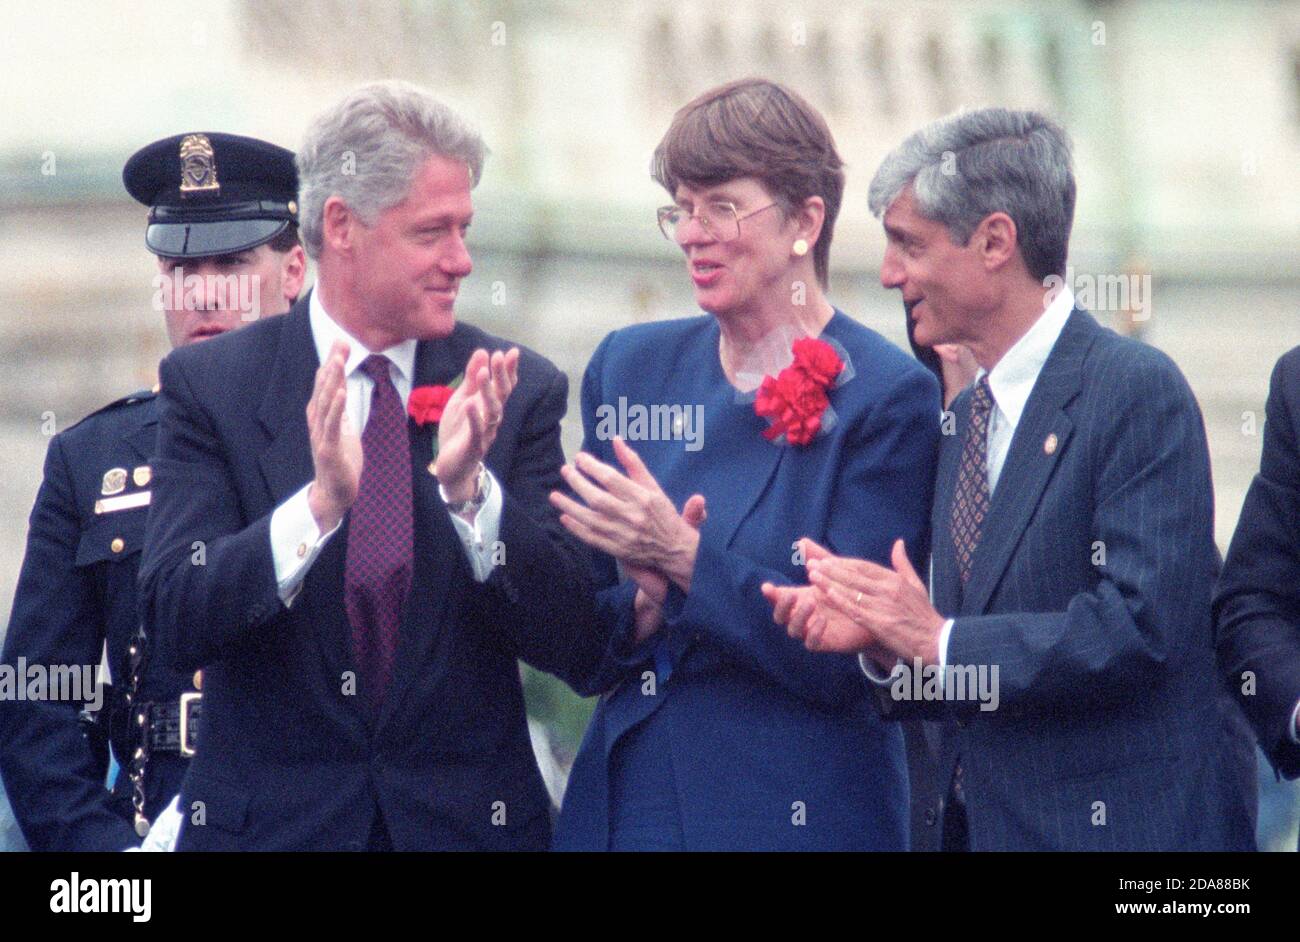 United States President Bill Clinton, left, with US Attorney General Janet Reno, center, and Us Secretary of Treasury Robert Rubin at the United States Capitol during the 15th Annual National Peace Officers Memorial Day Service in Washington, DC on May 15, 1996.  Photo by Francis Specker Stock Photo